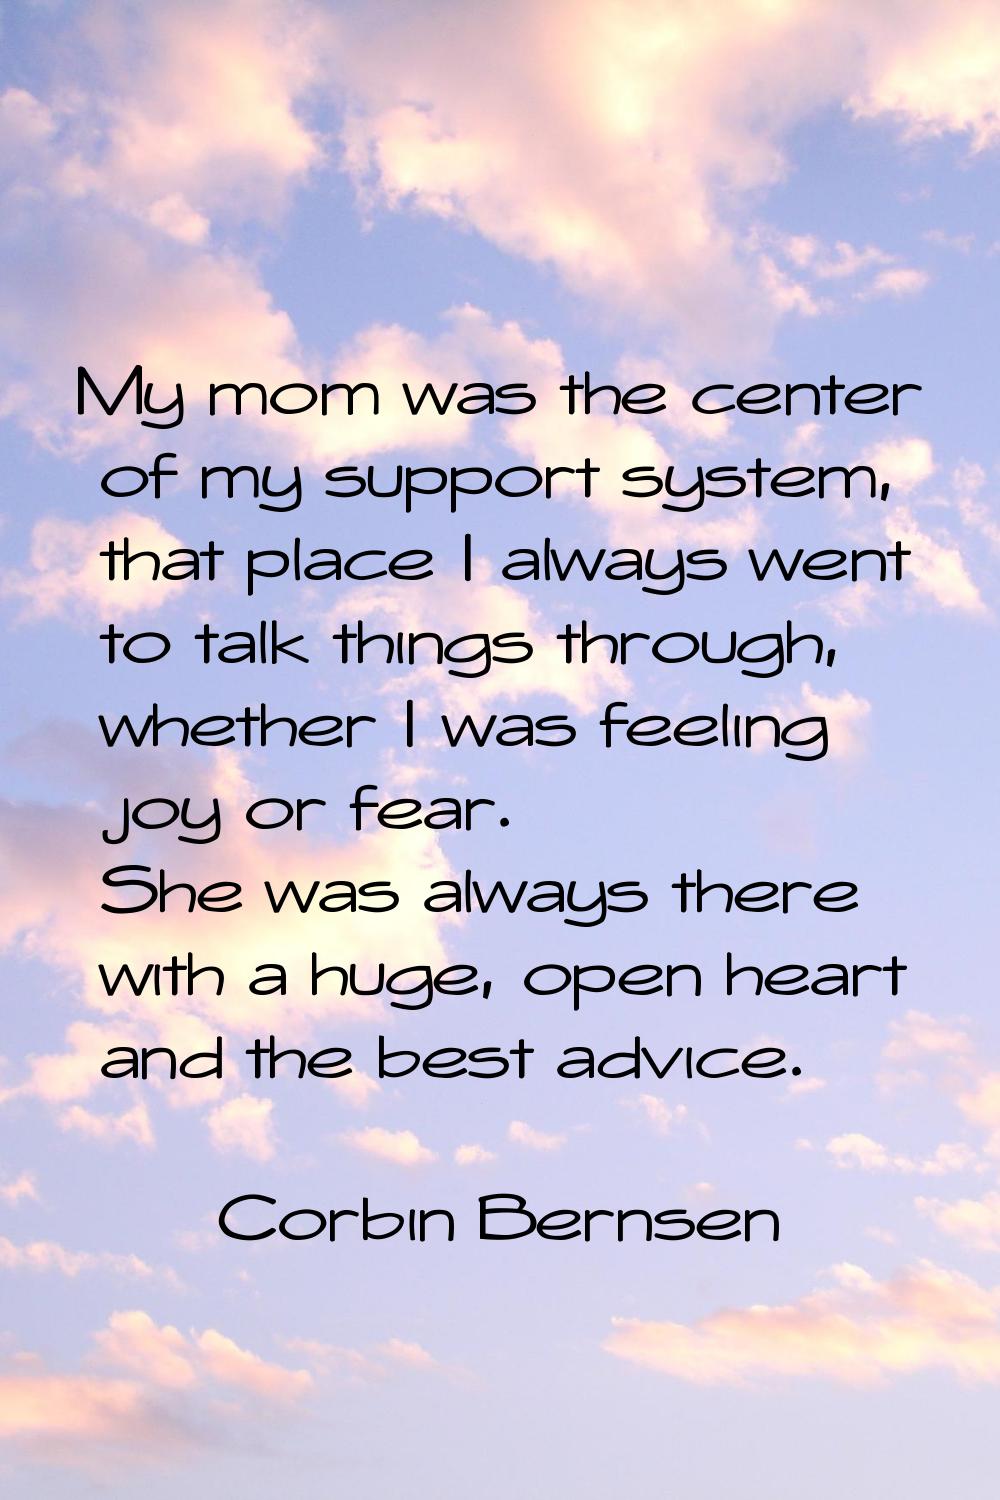 My mom was the center of my support system, that place I always went to talk things through, whethe